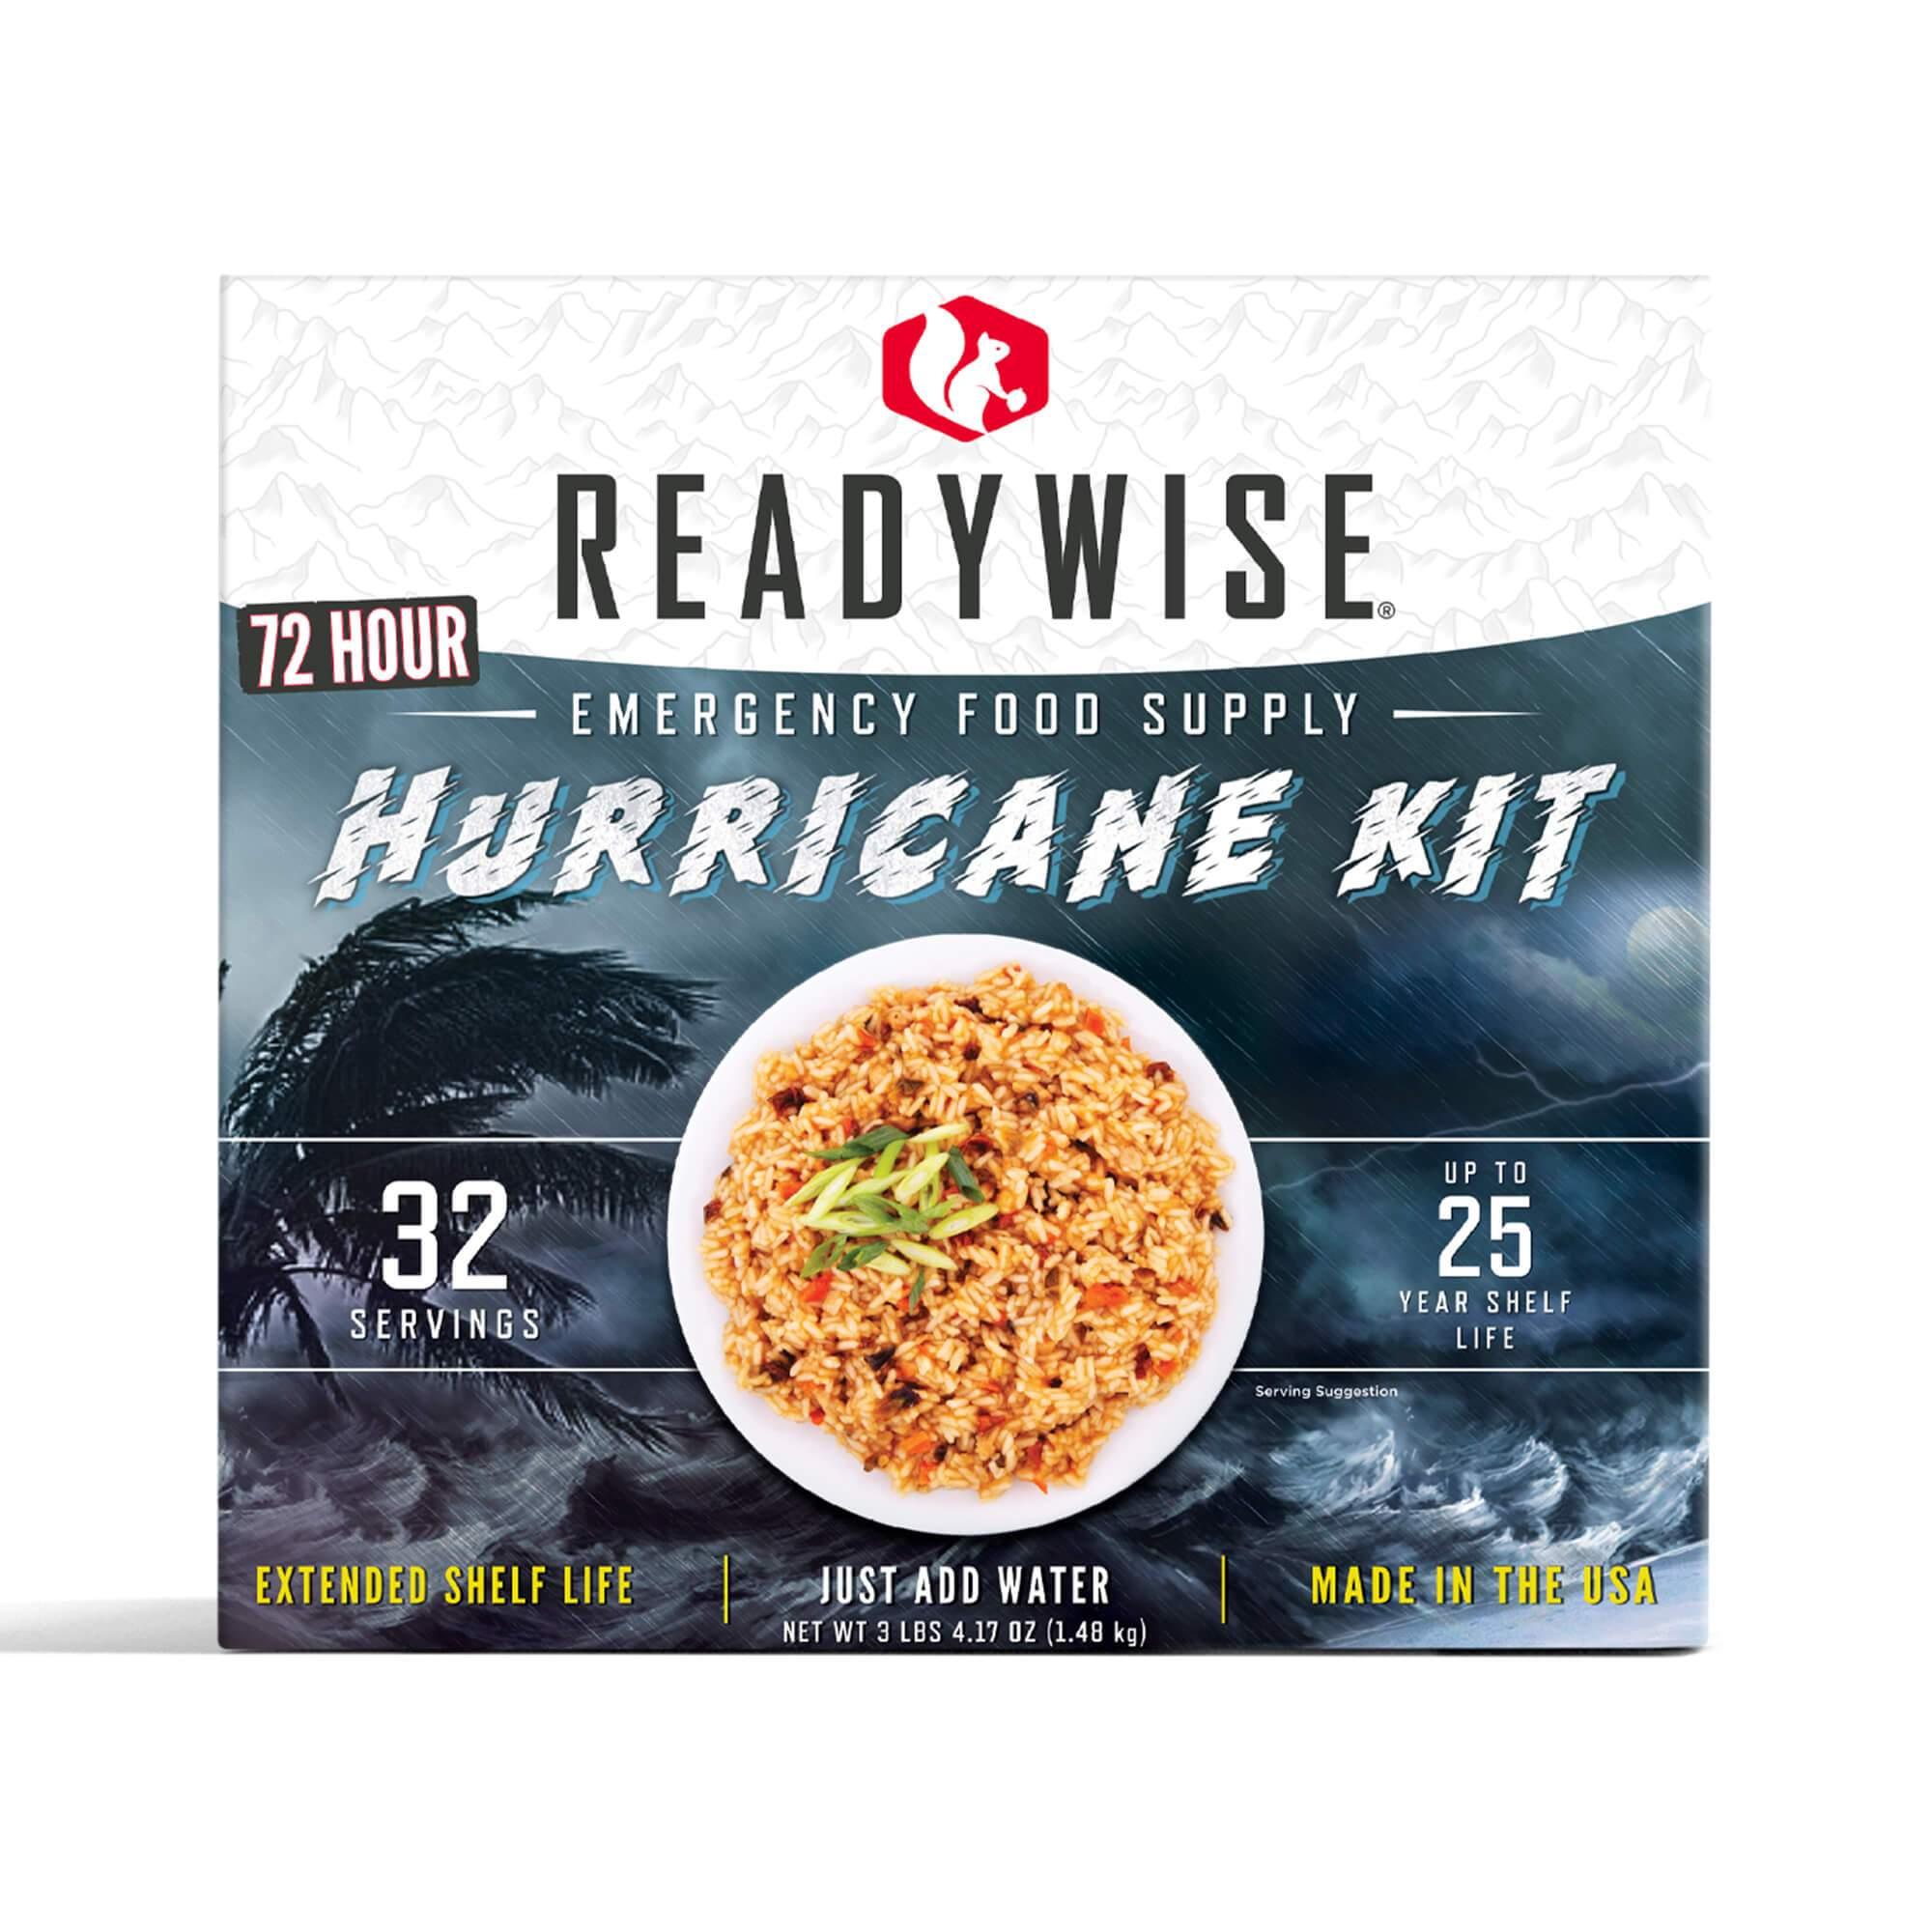 2021 Limited Edition 72 Hour Hurricane Emergency Food Kit - ReadyWise